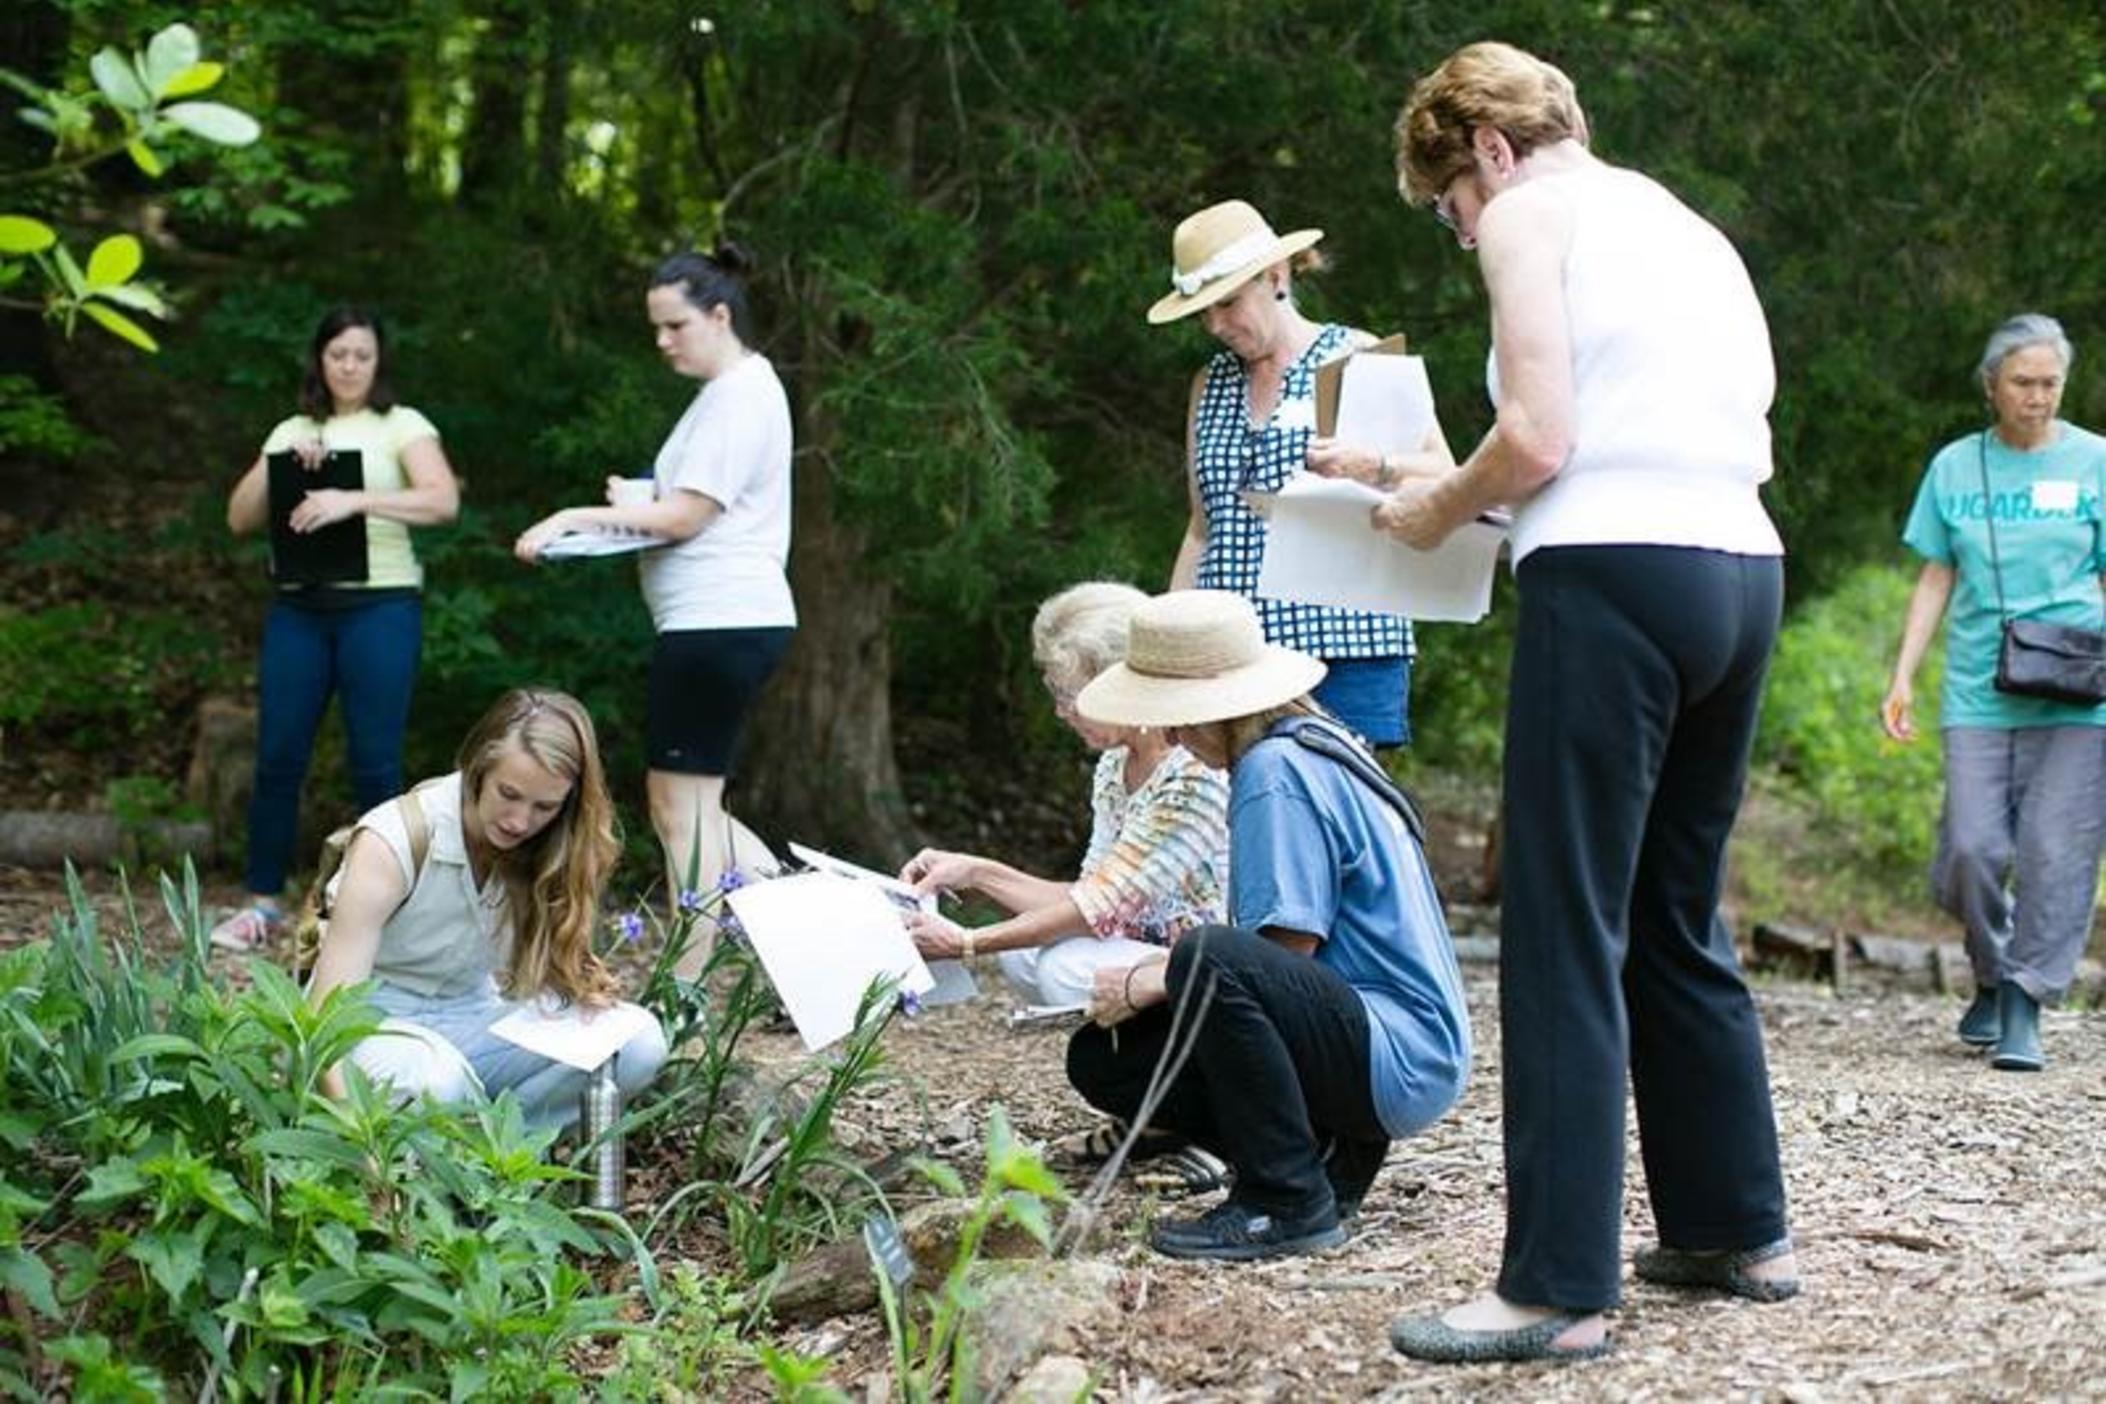 Students in the Medicinal Plants course identify plants. Courtesy of Cora Keber.